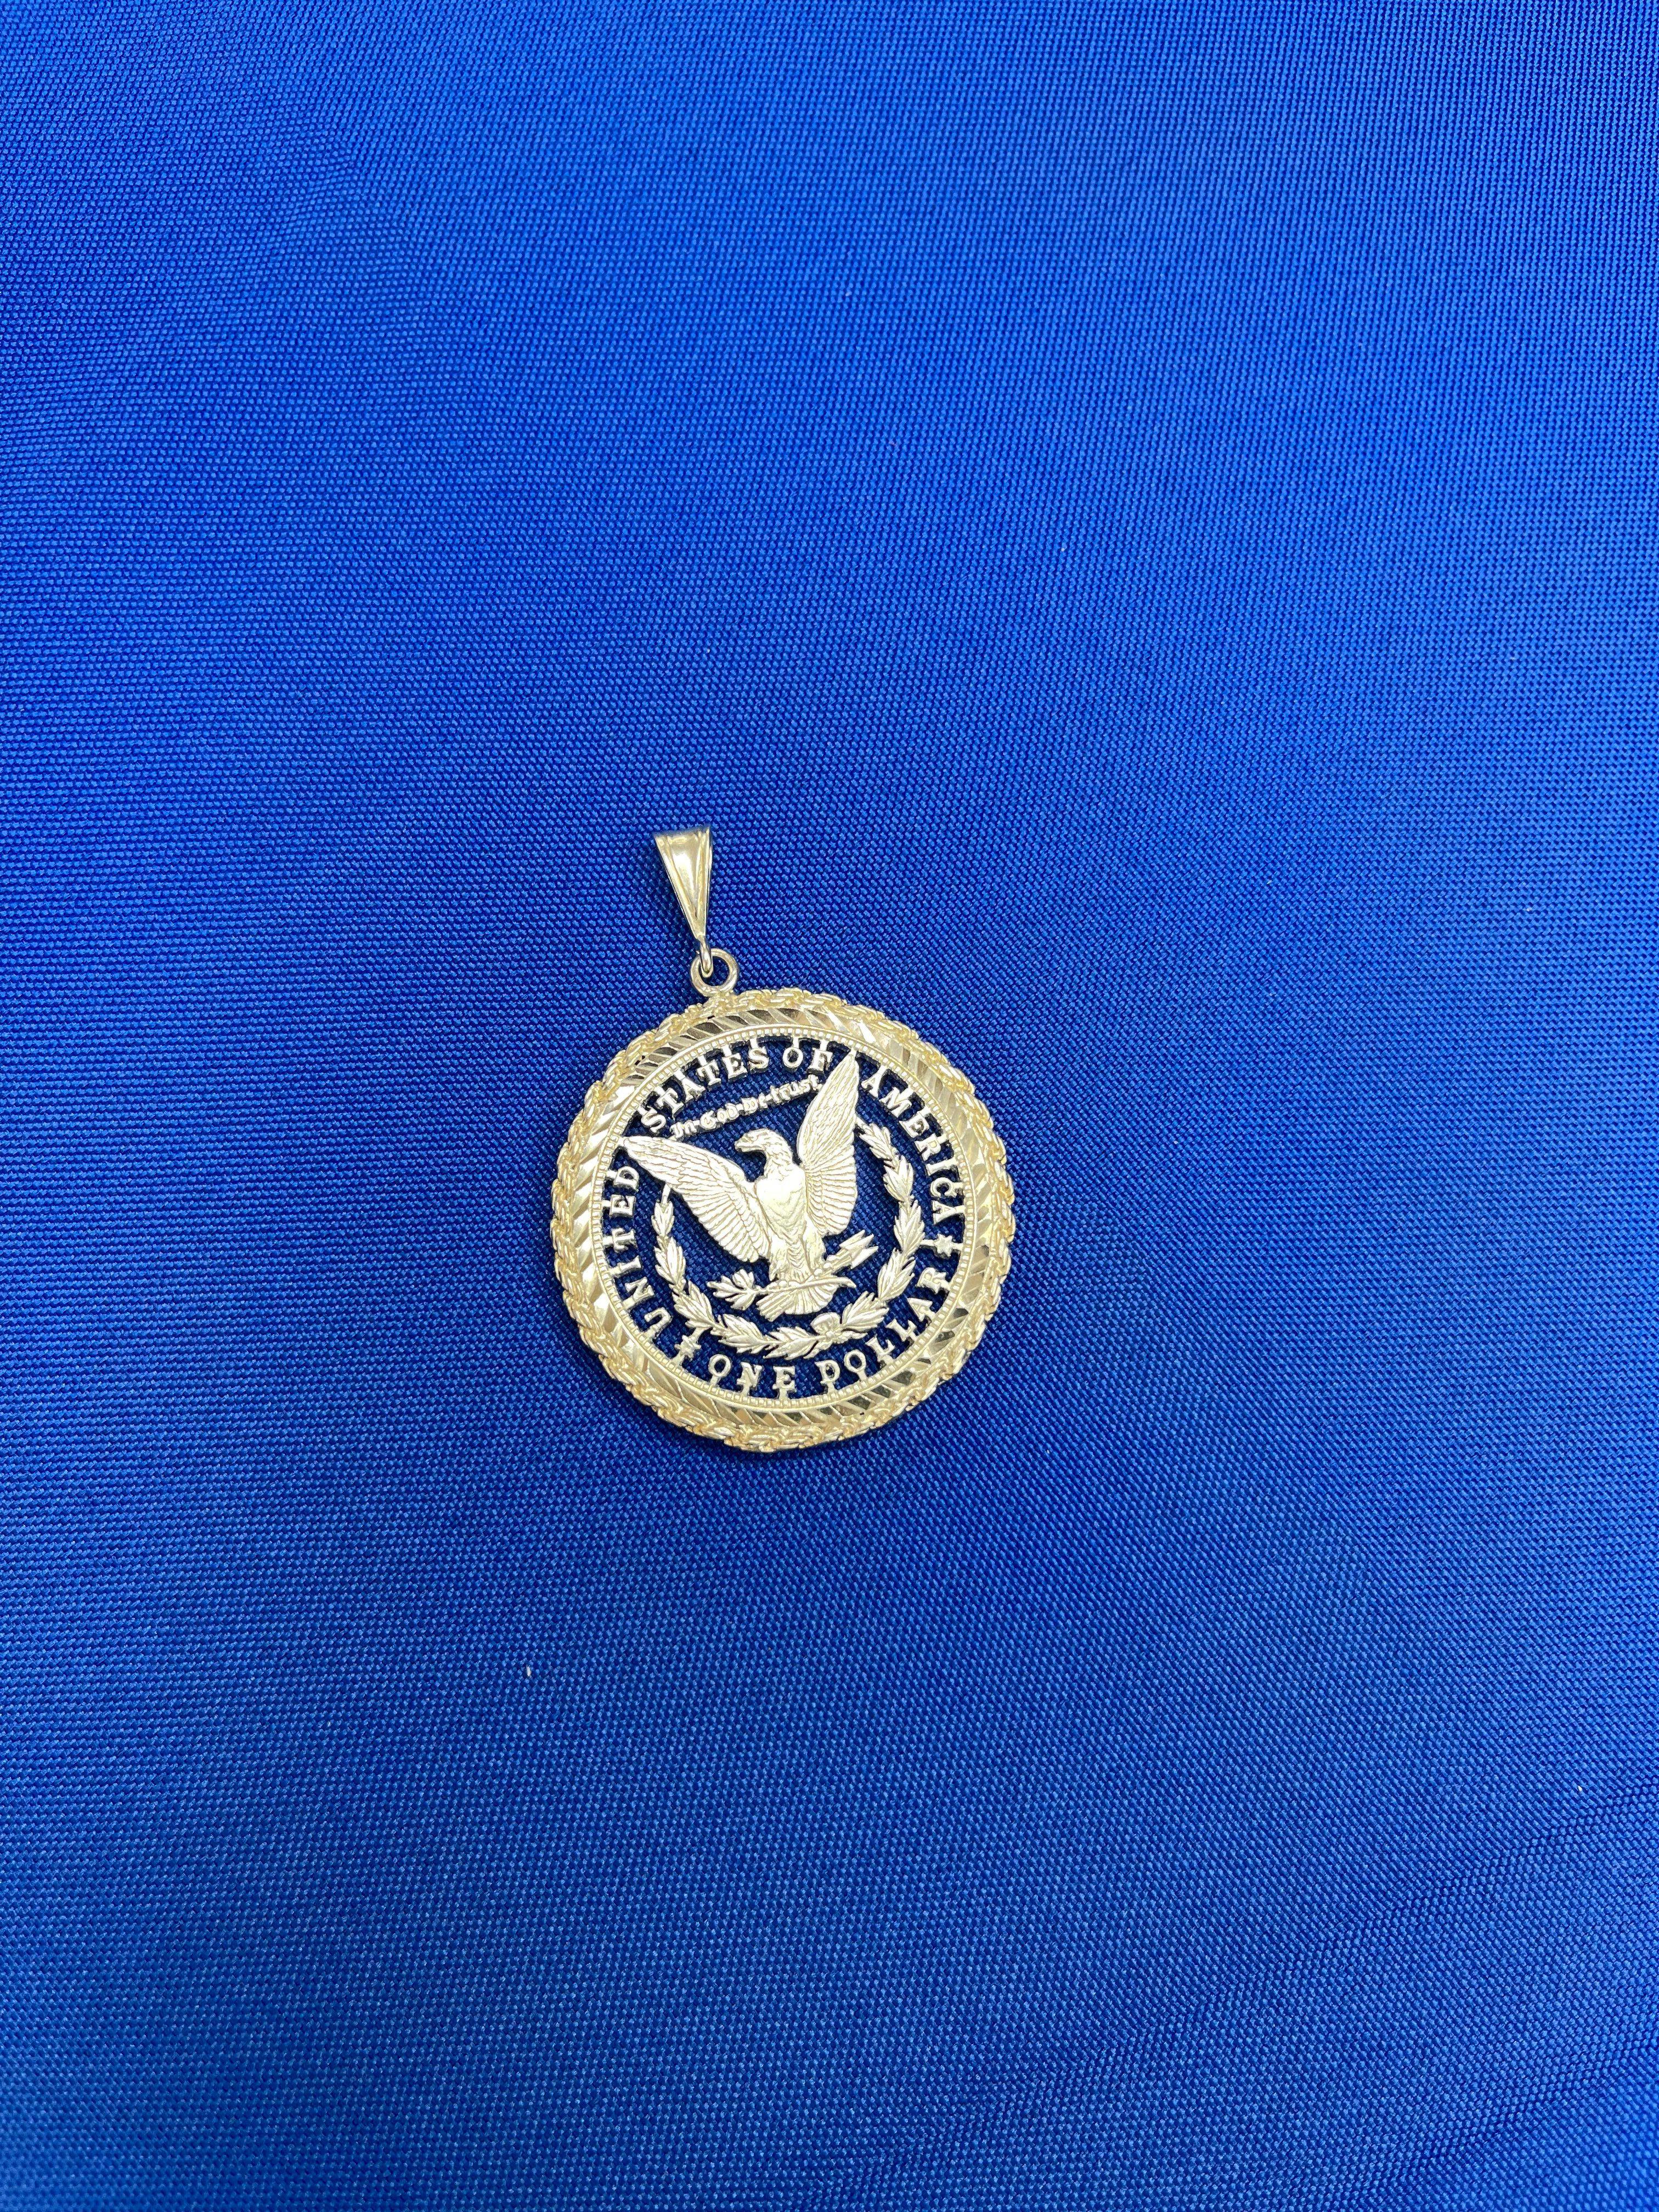 Vintage Dollar Coin White Rhodium Plated Sterling Silver Charm Medallion Pendant In New Condition For Sale In Oakton, VA